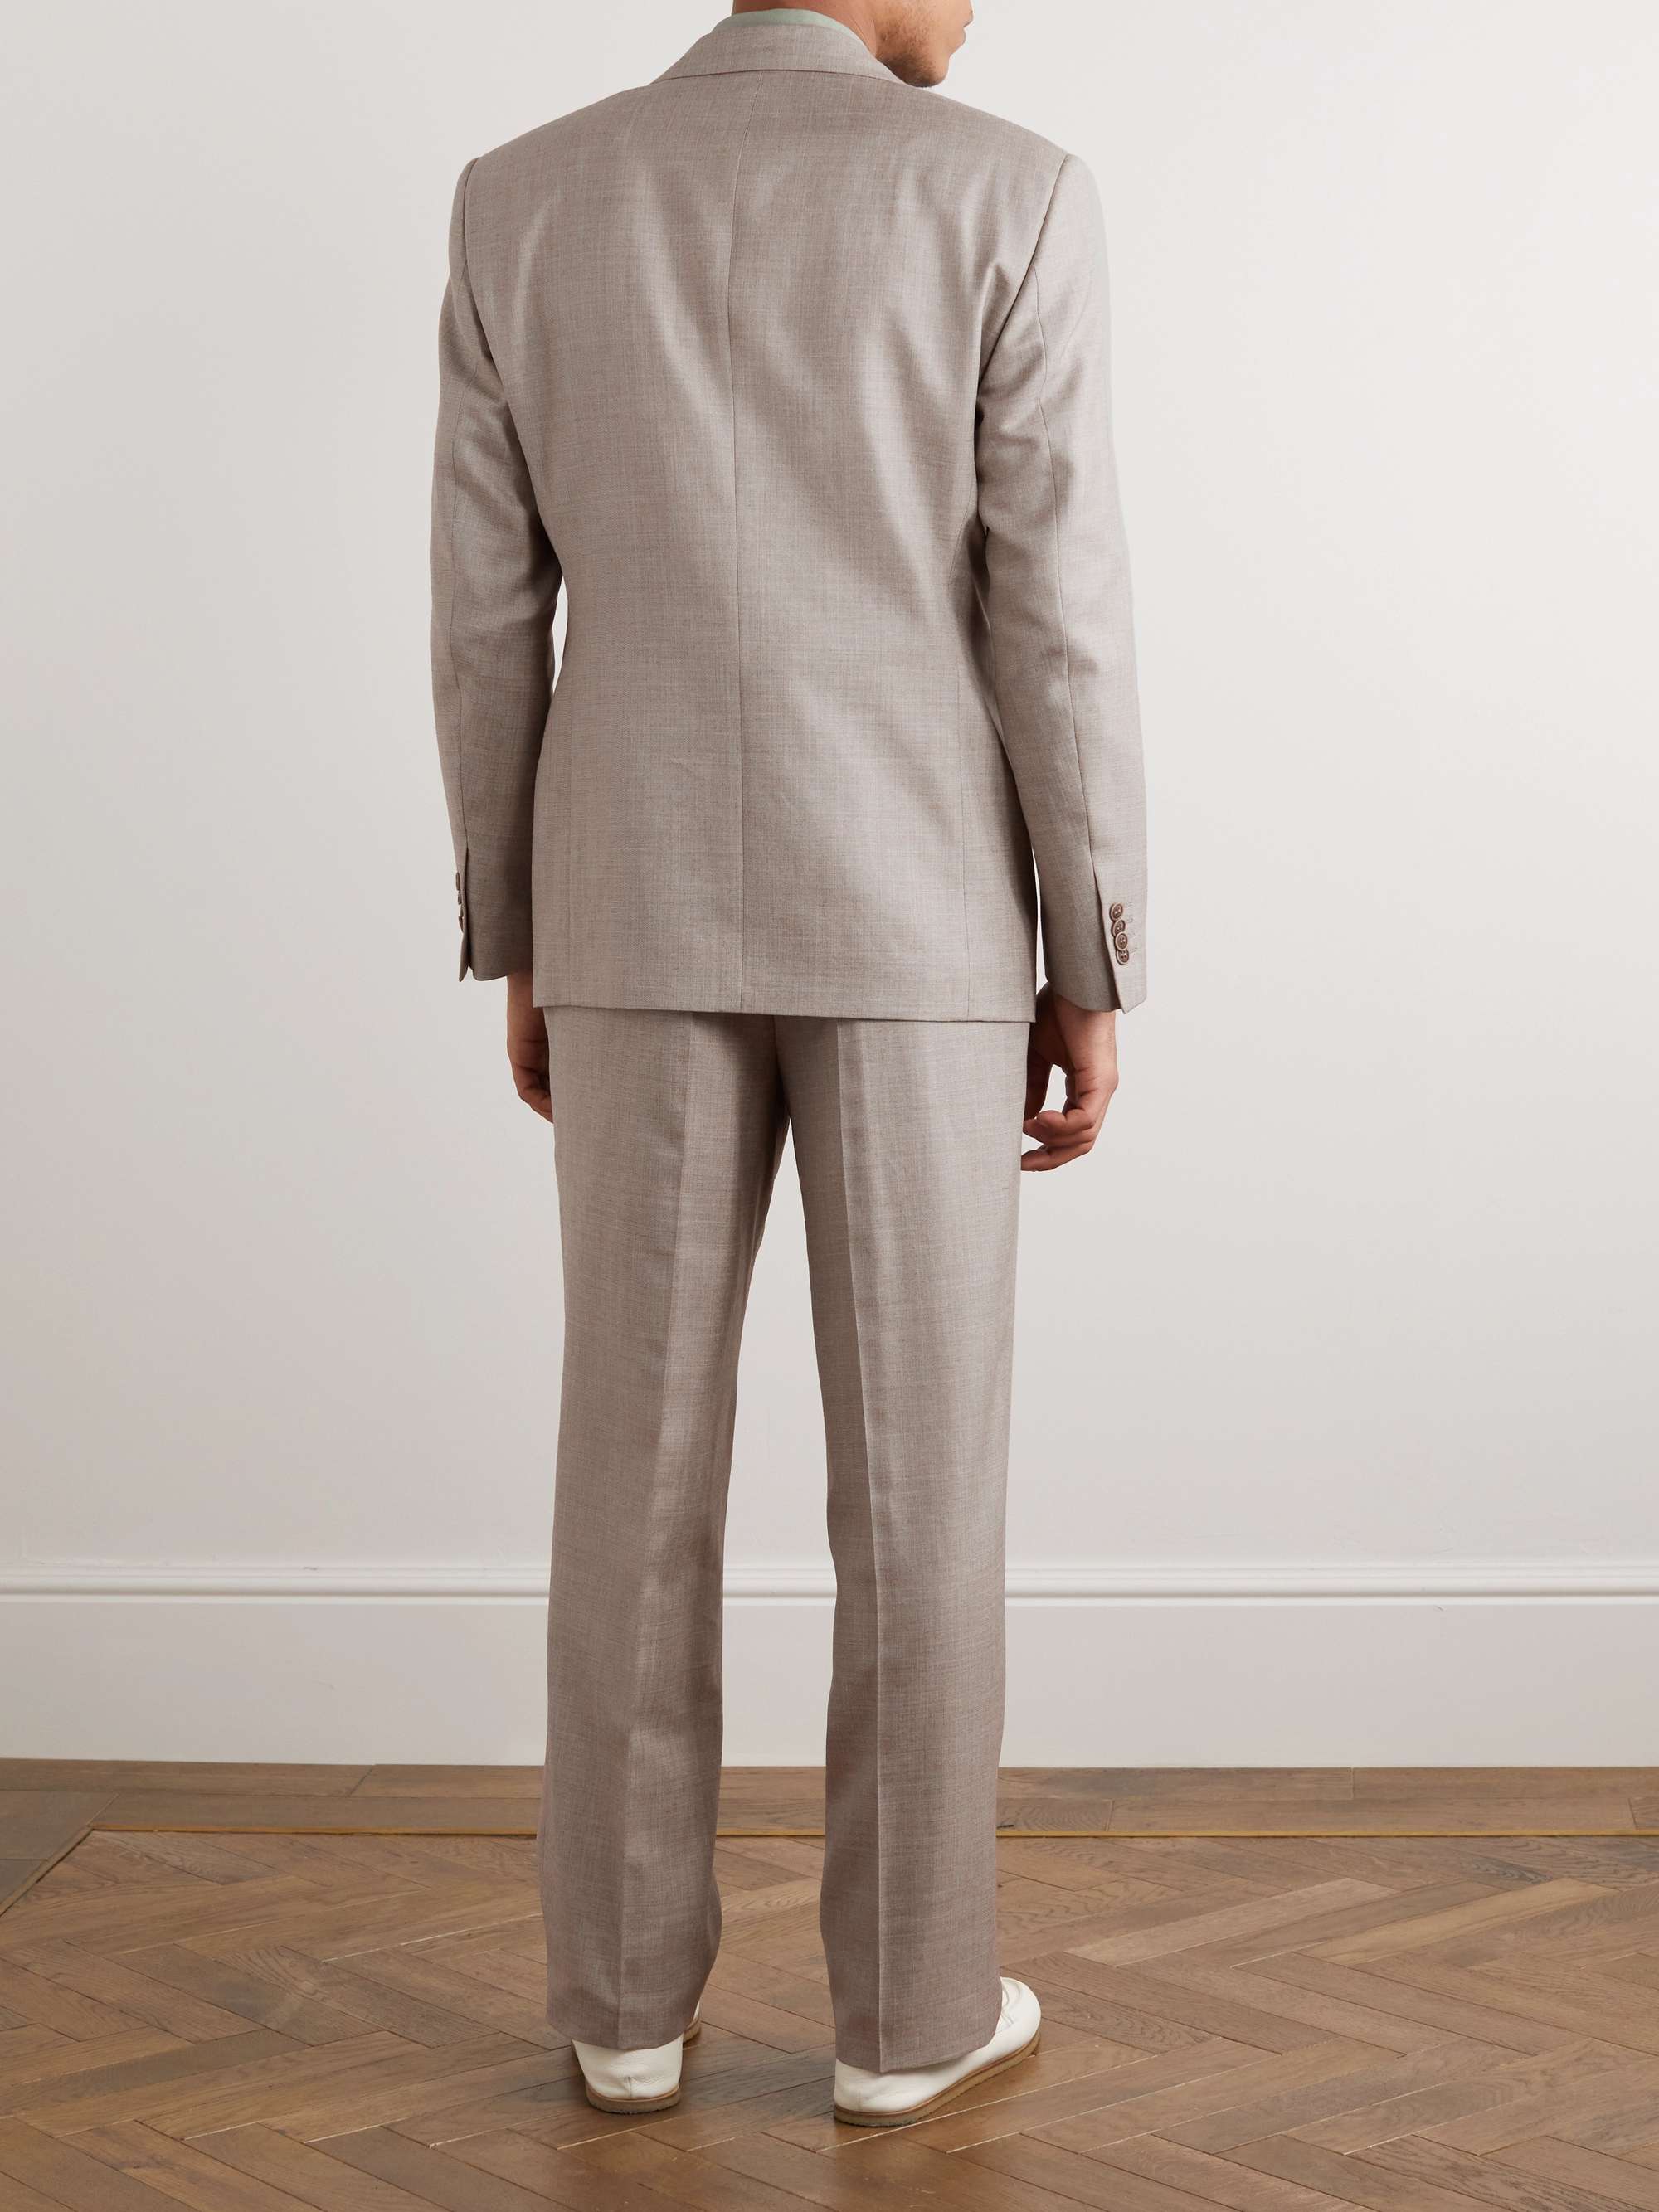 GIORGIO ARMANI Double-Breasted Wool, Silk and Linen-Blend Hopsack Suit